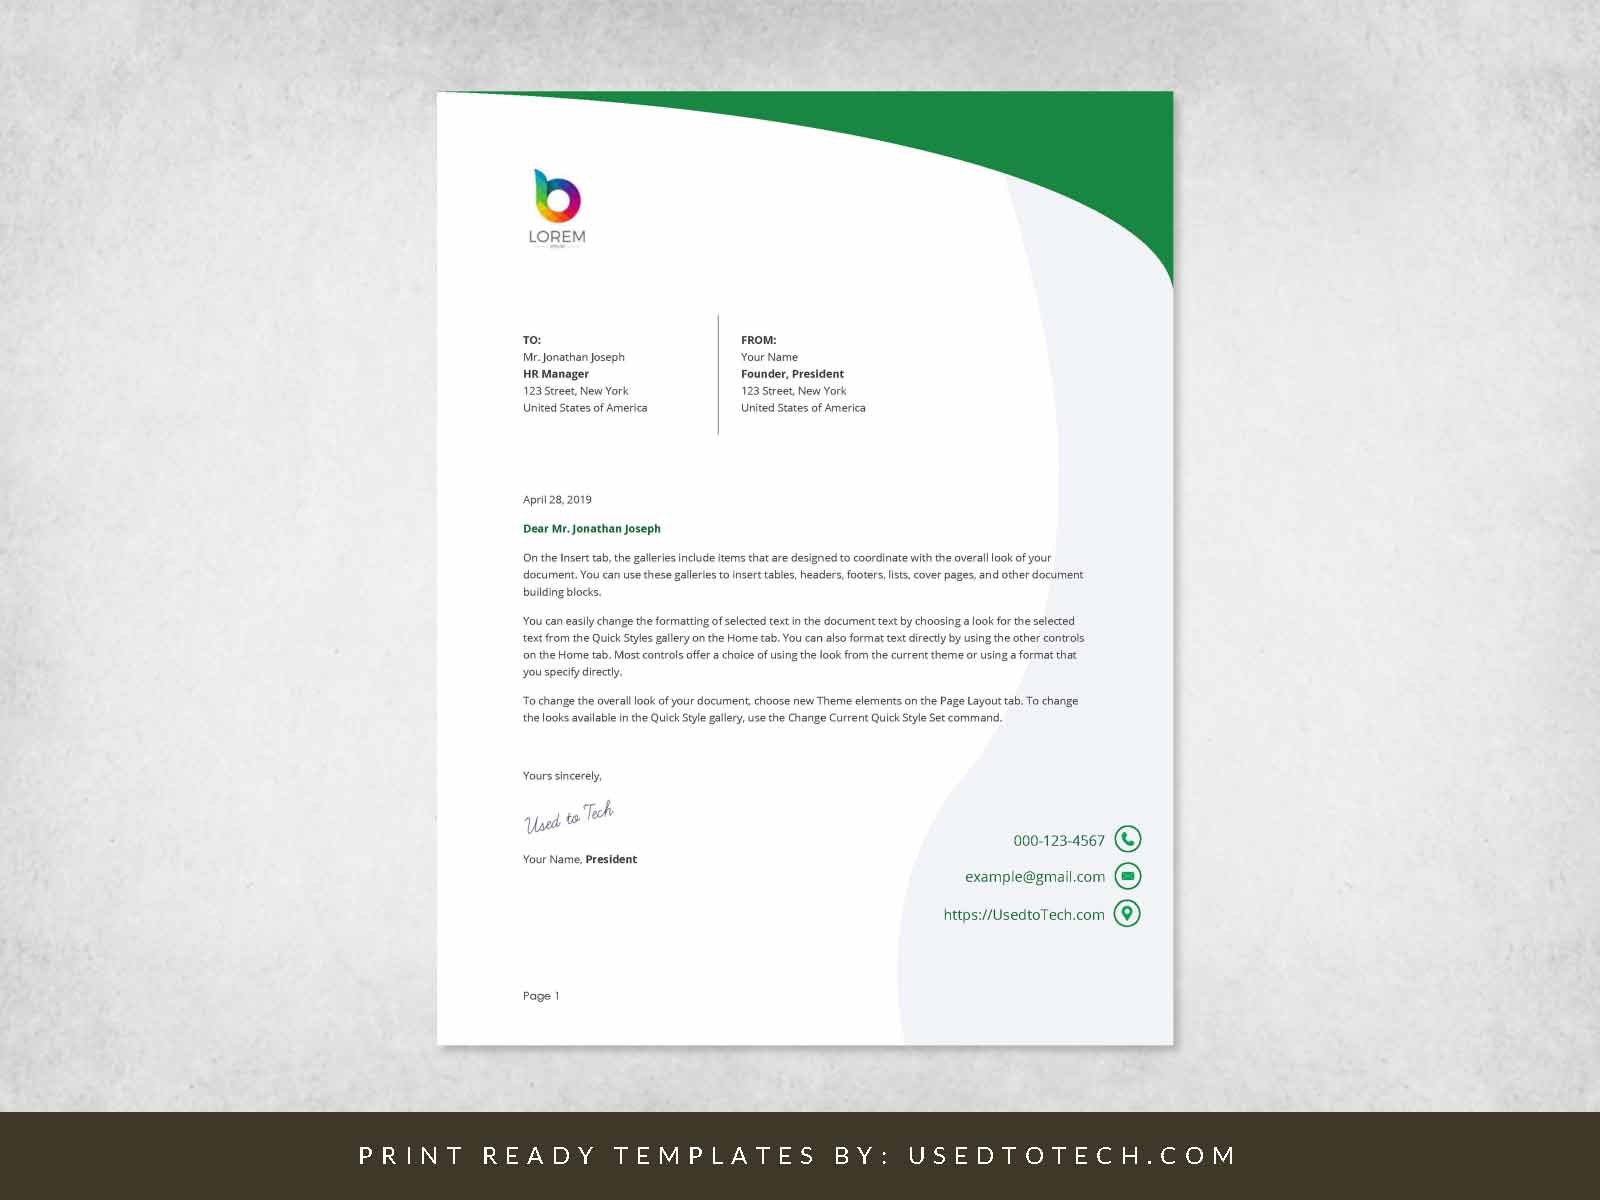 Perfect letterhead design in Word free - Used to Tech Inside Make A Letterhead Template In Word